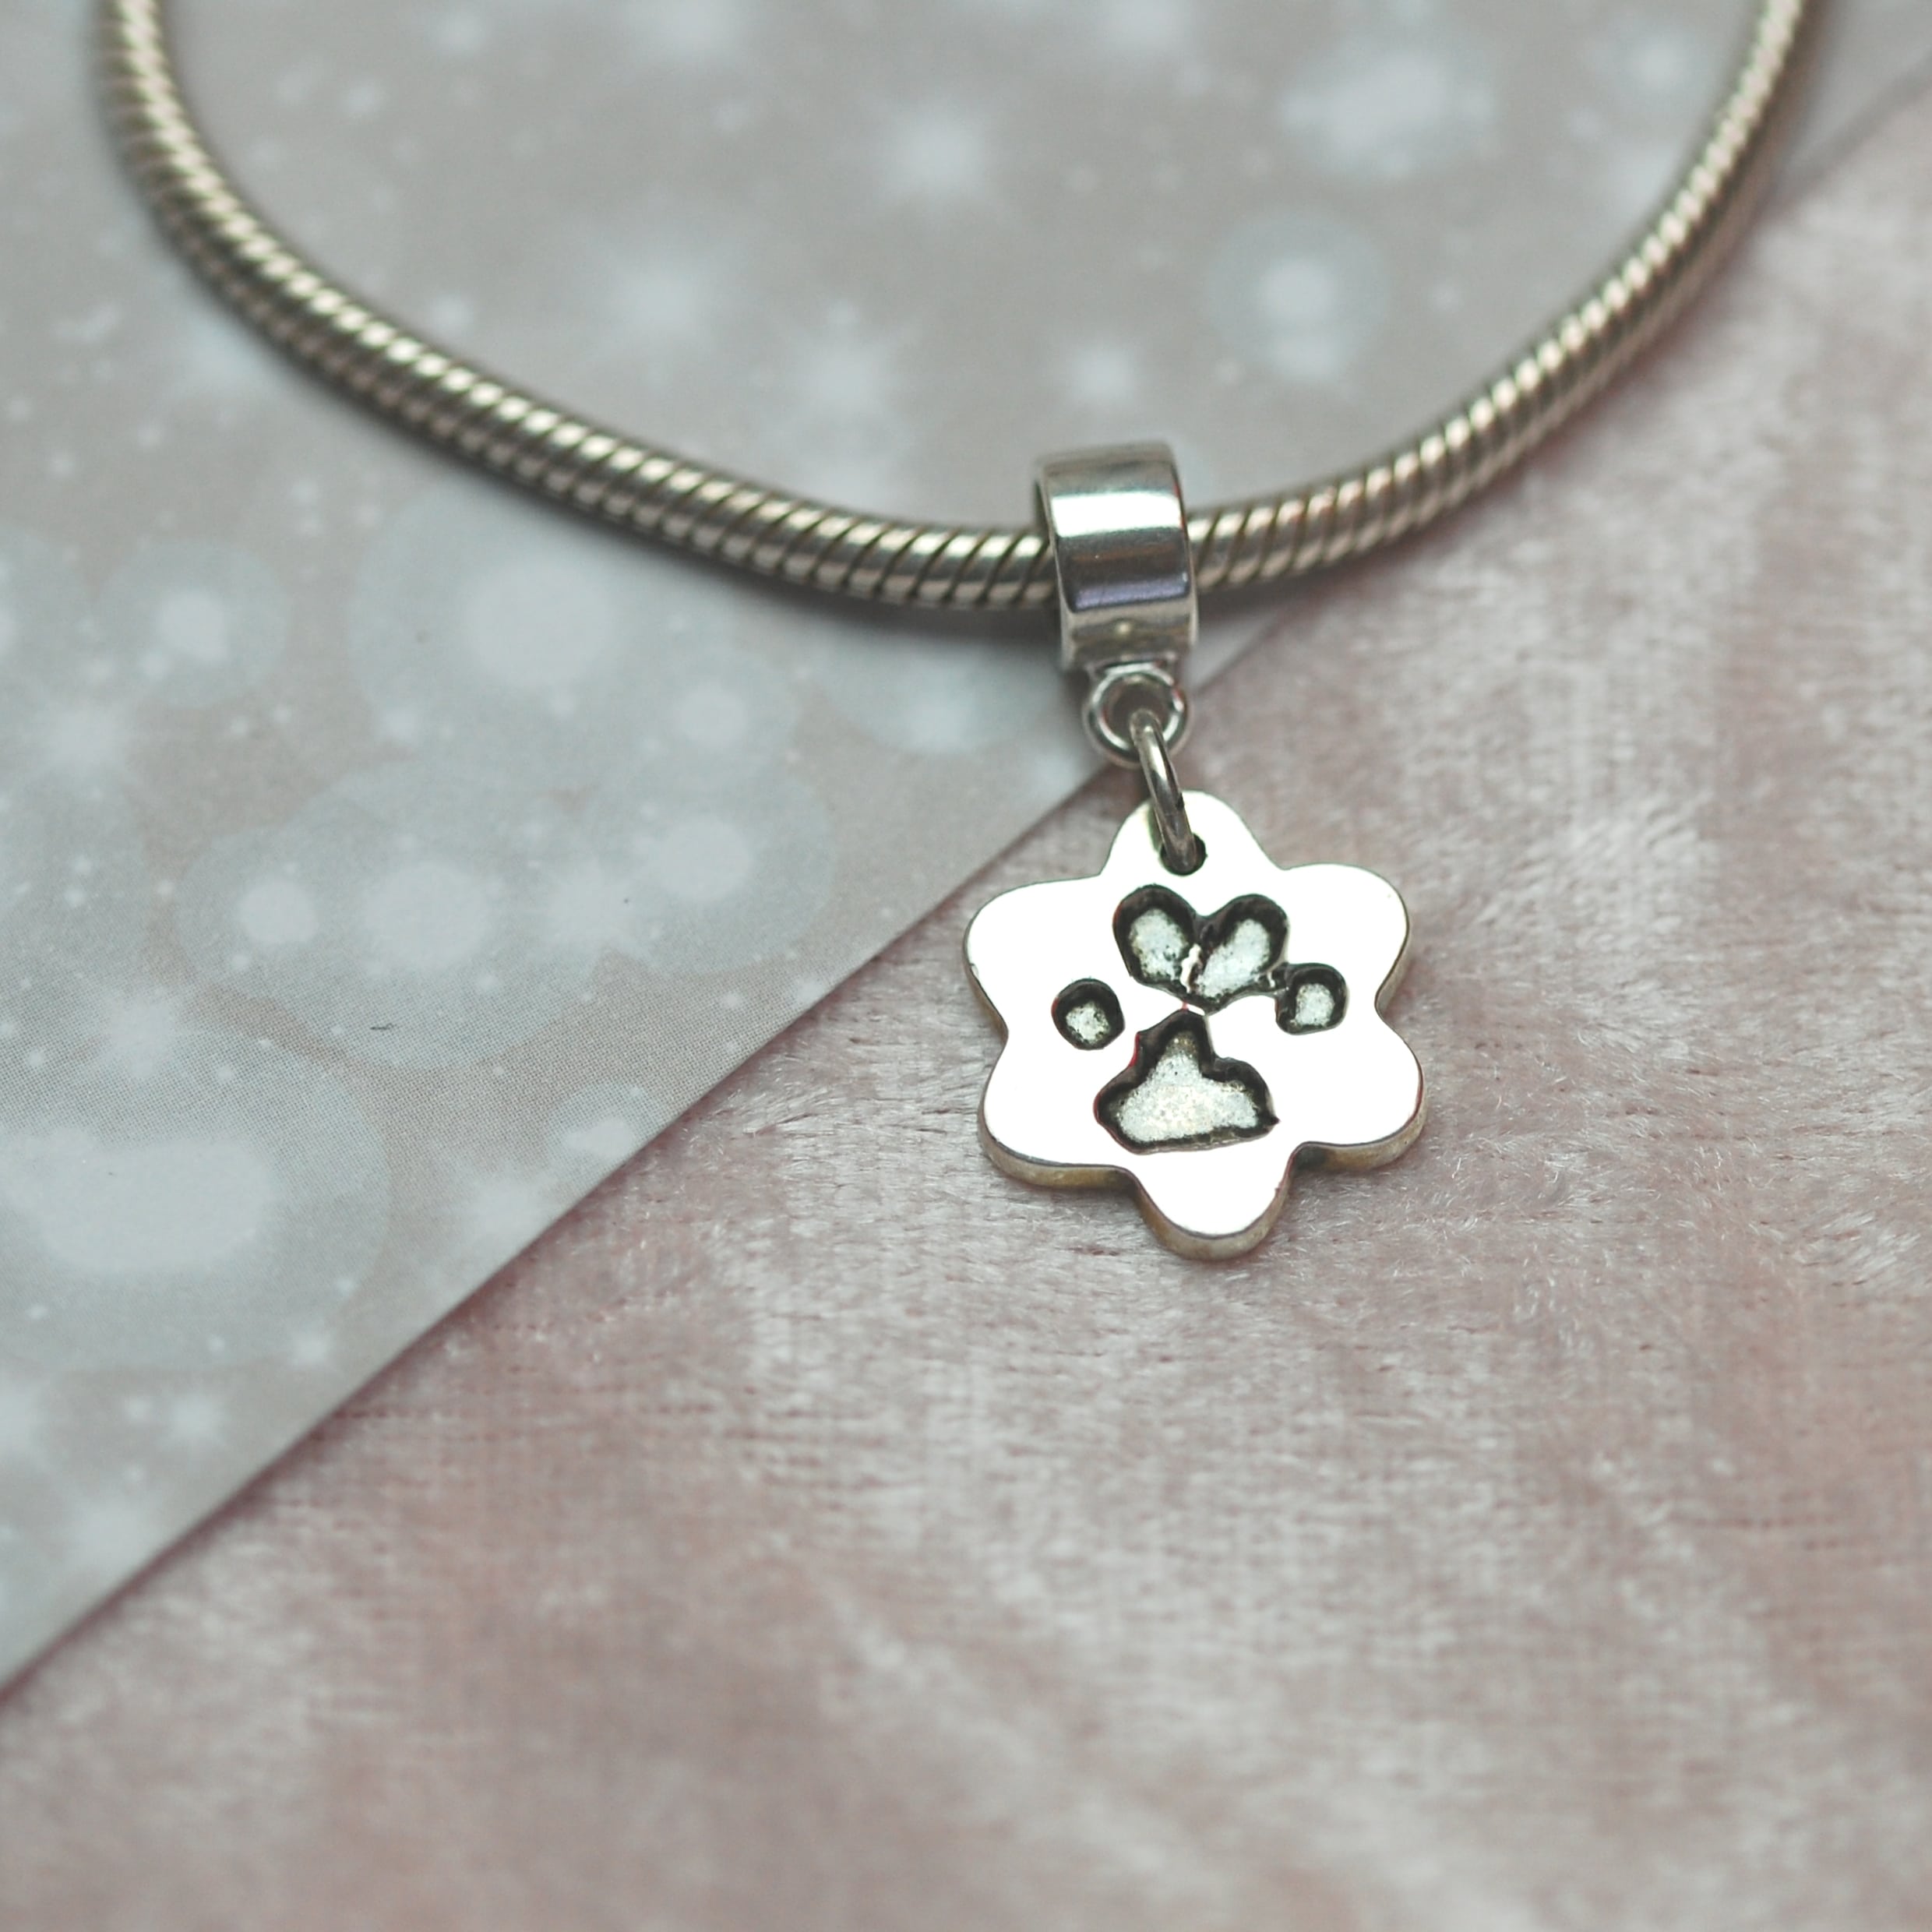 Small silver flower paw print charm with charm carrier